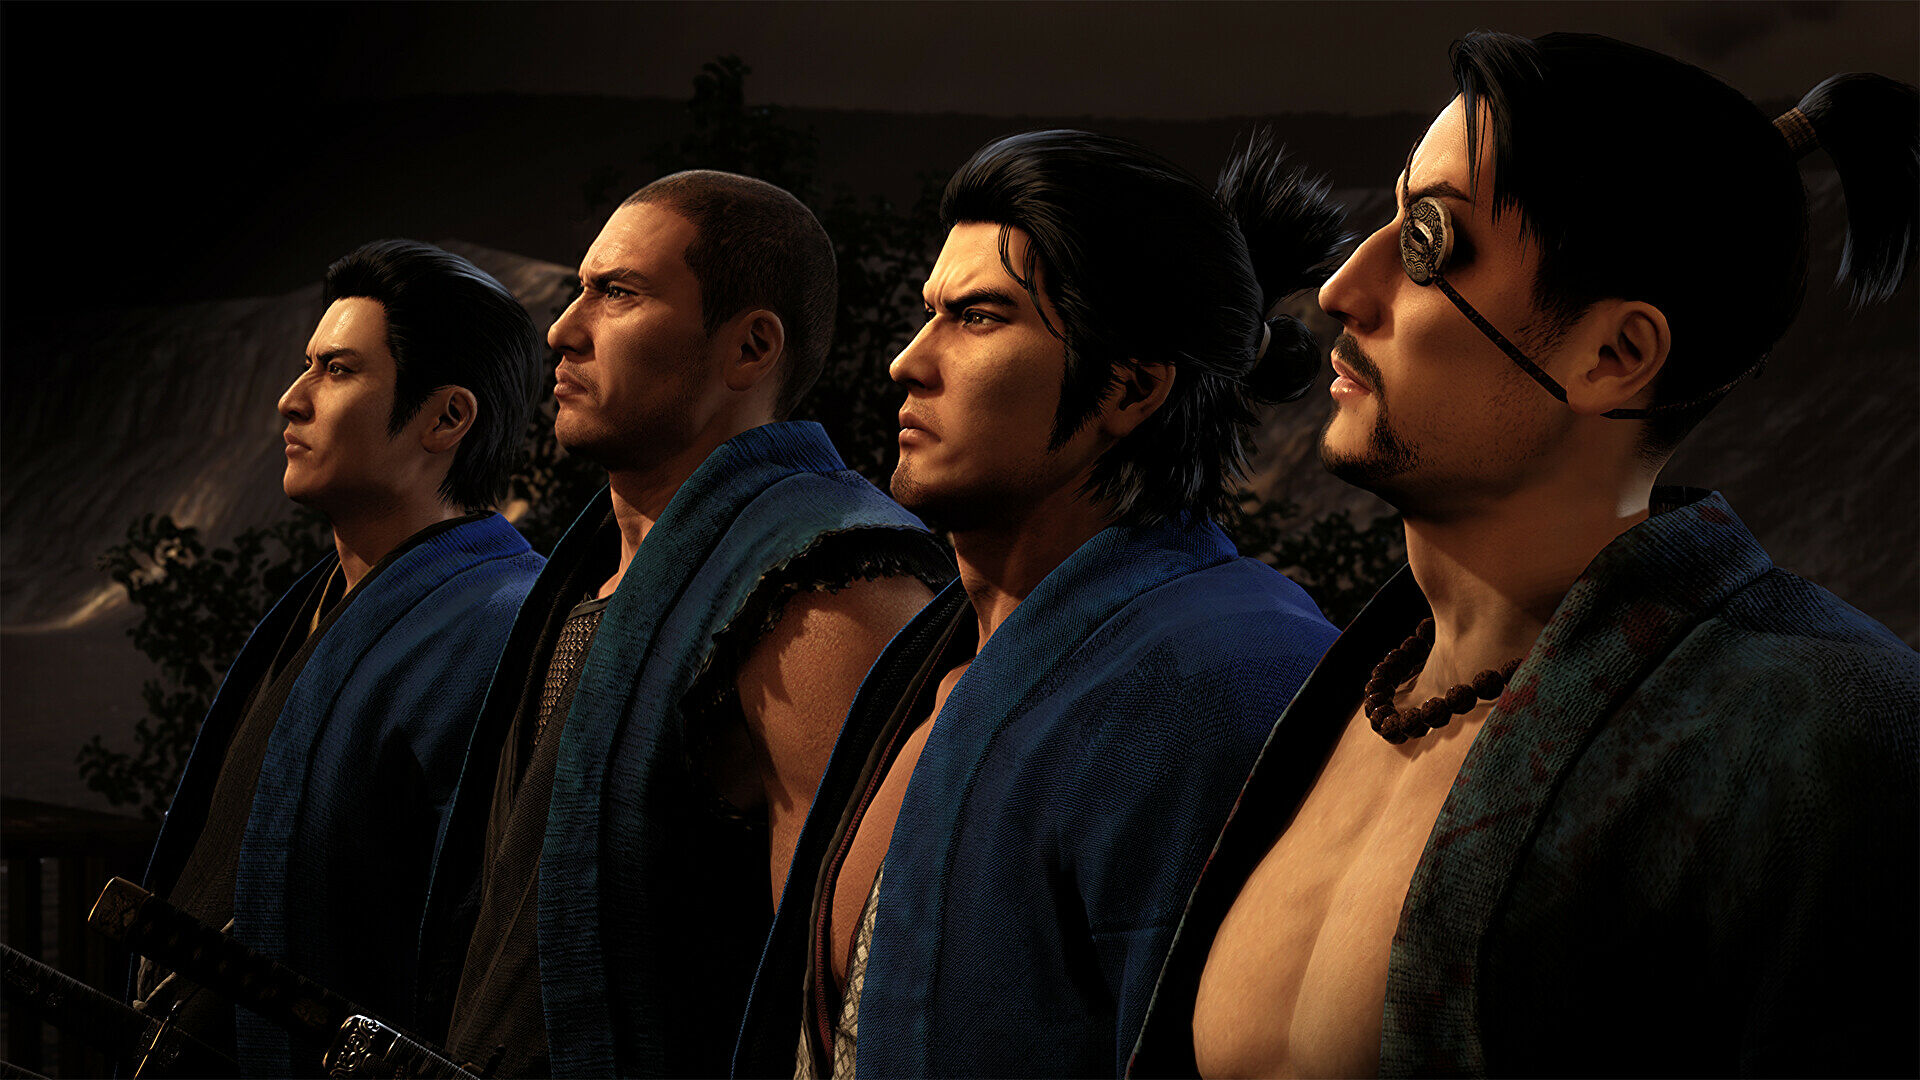 Like a Dragon: Ishin will not be dubbed in English